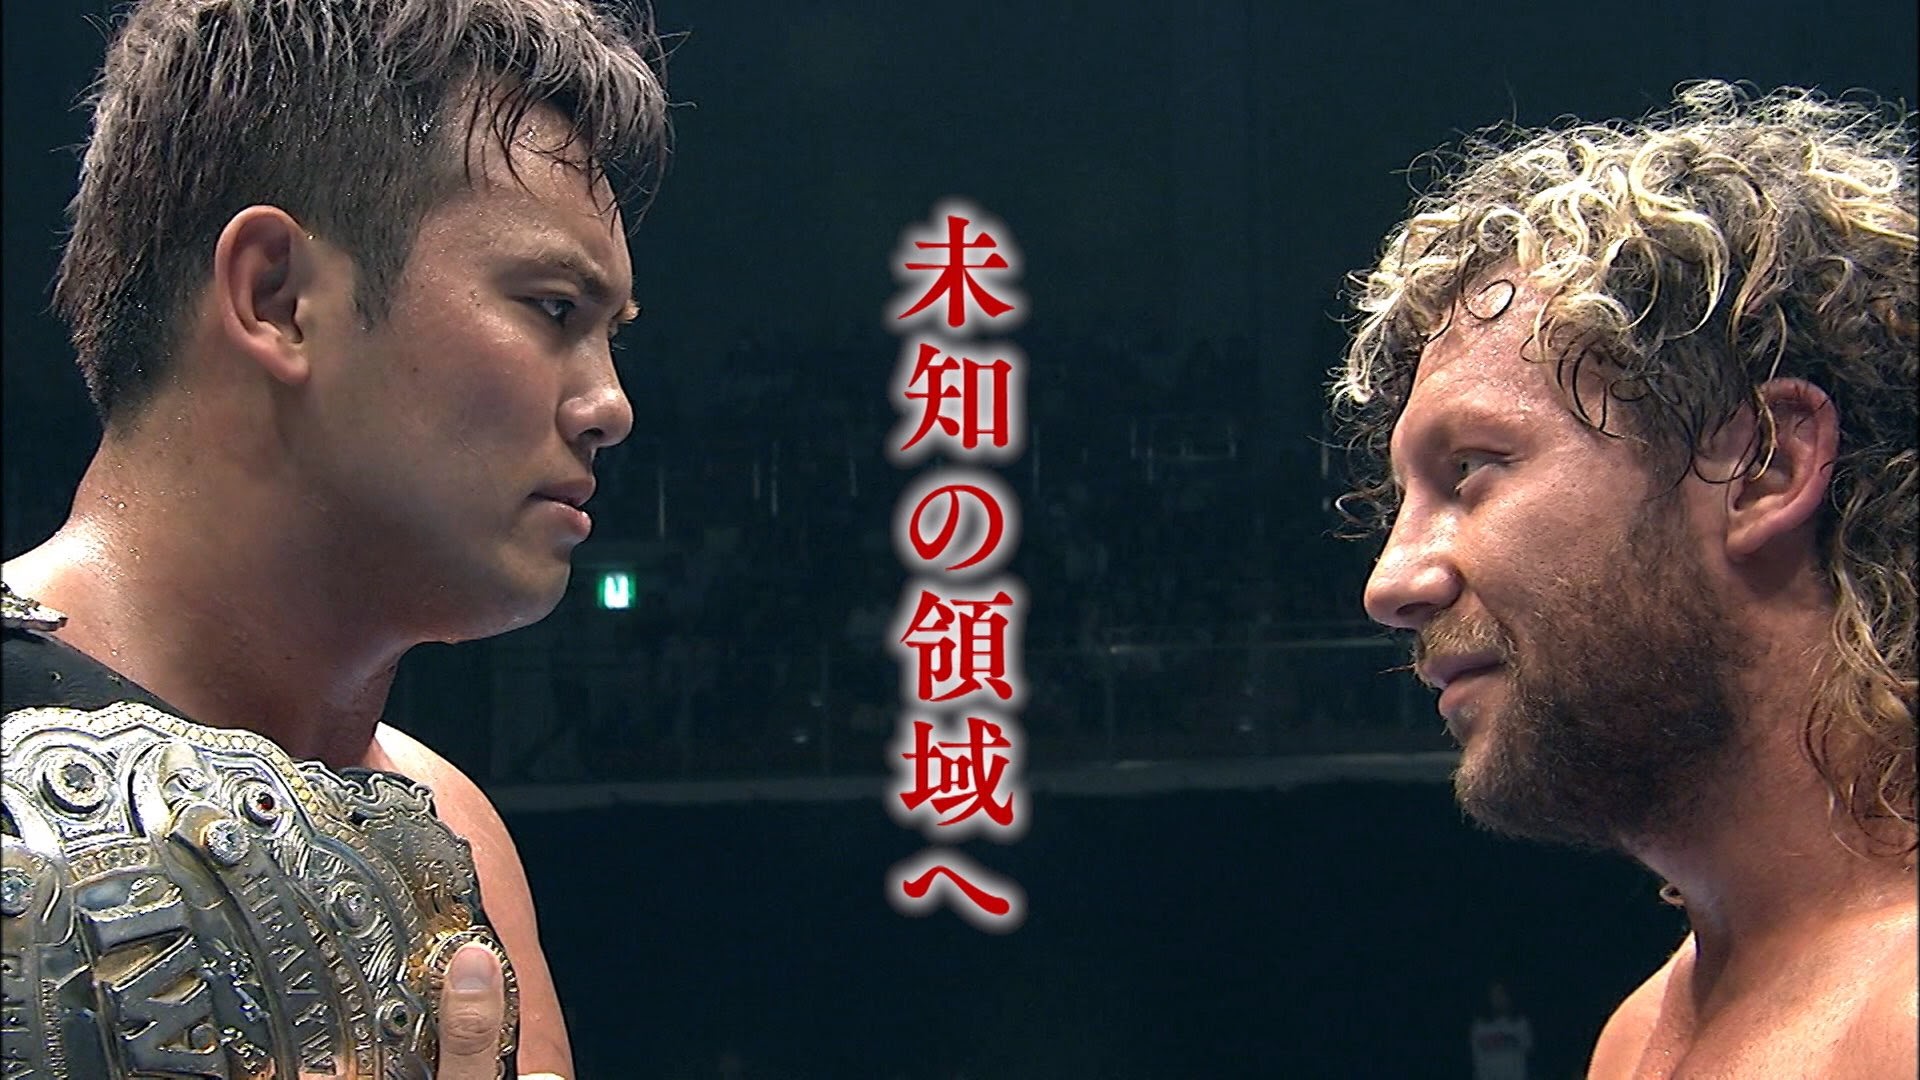 Match graphic of Kenny and Okada facing each other. 